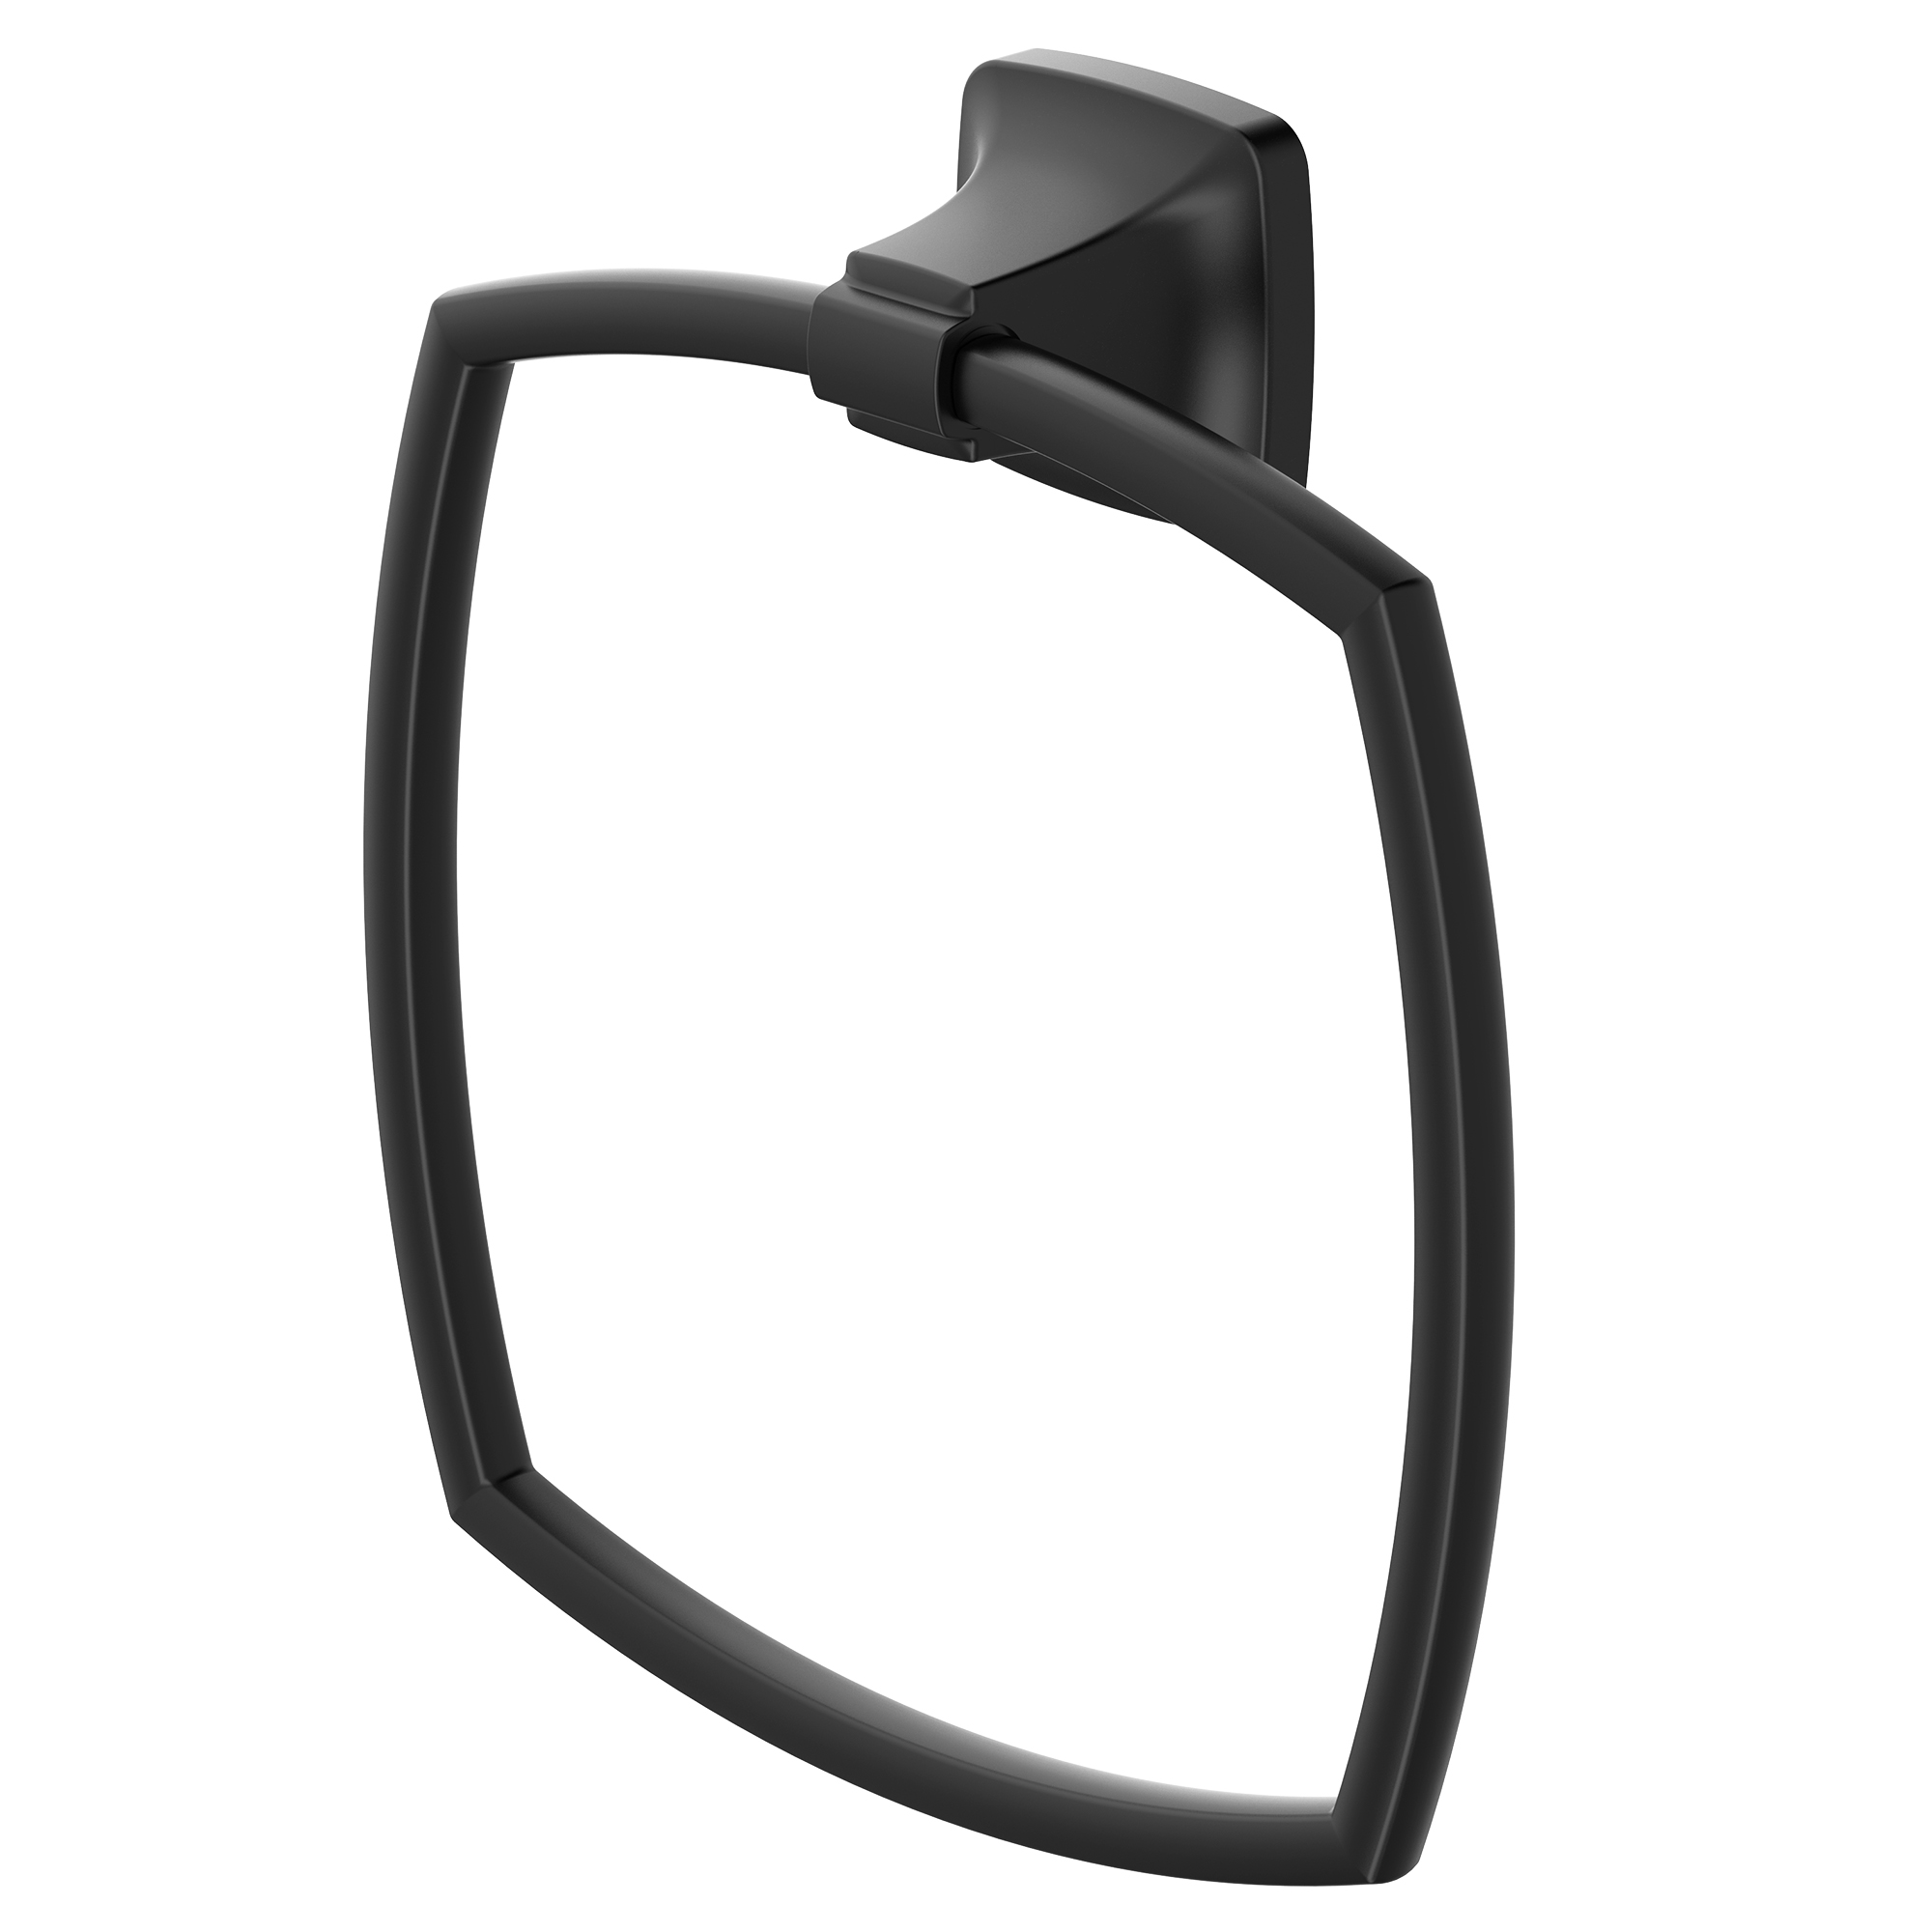 Townsend™ Towel Ring